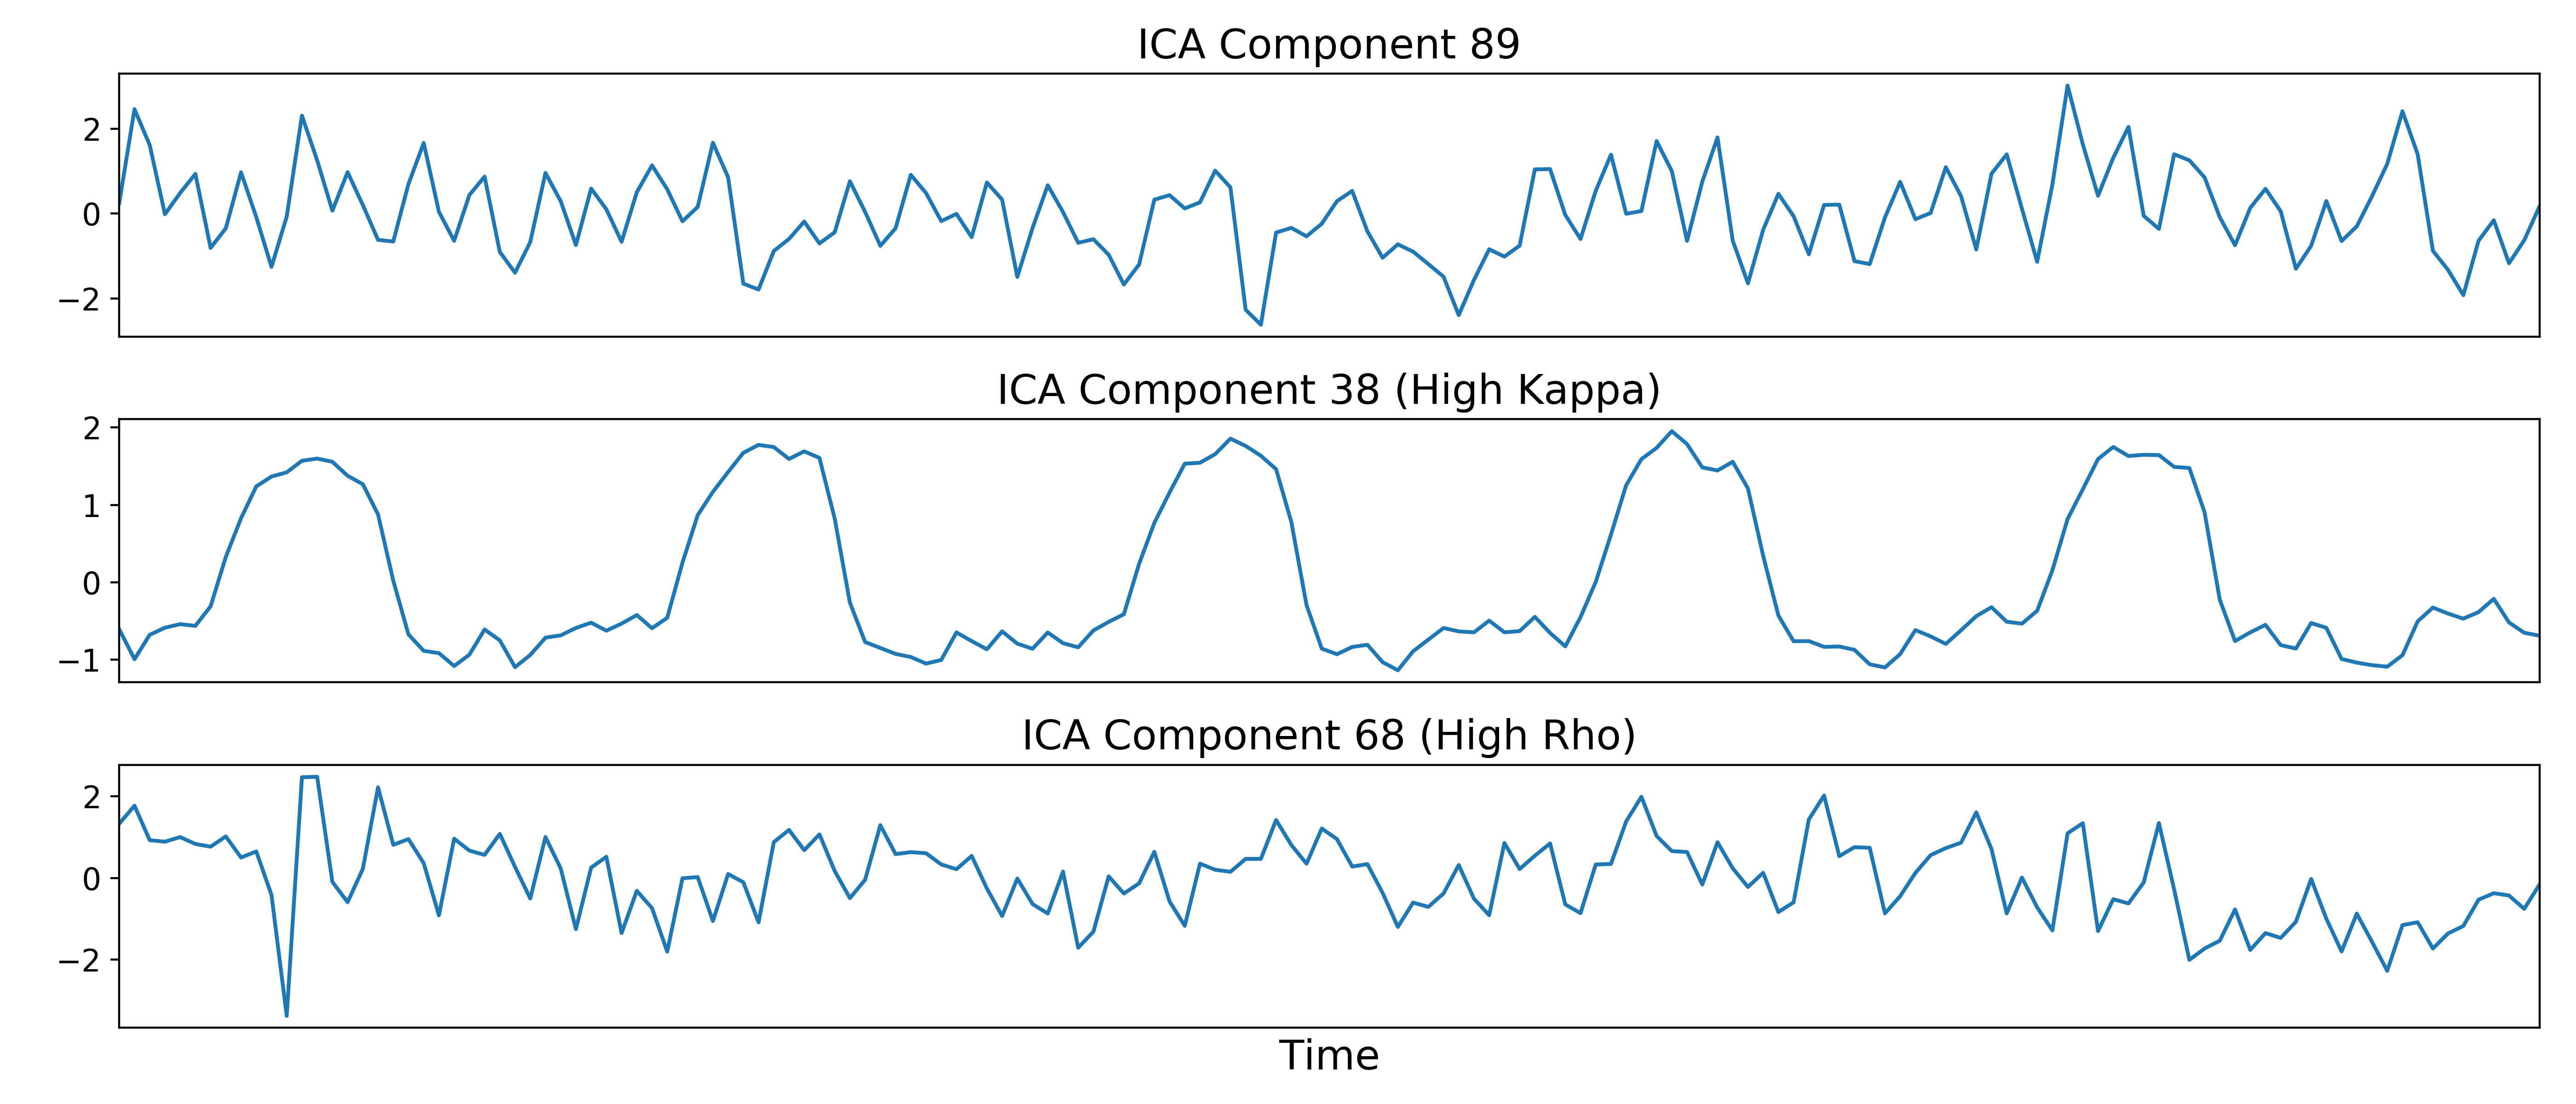 _images/13_ica_component_timeseries.png